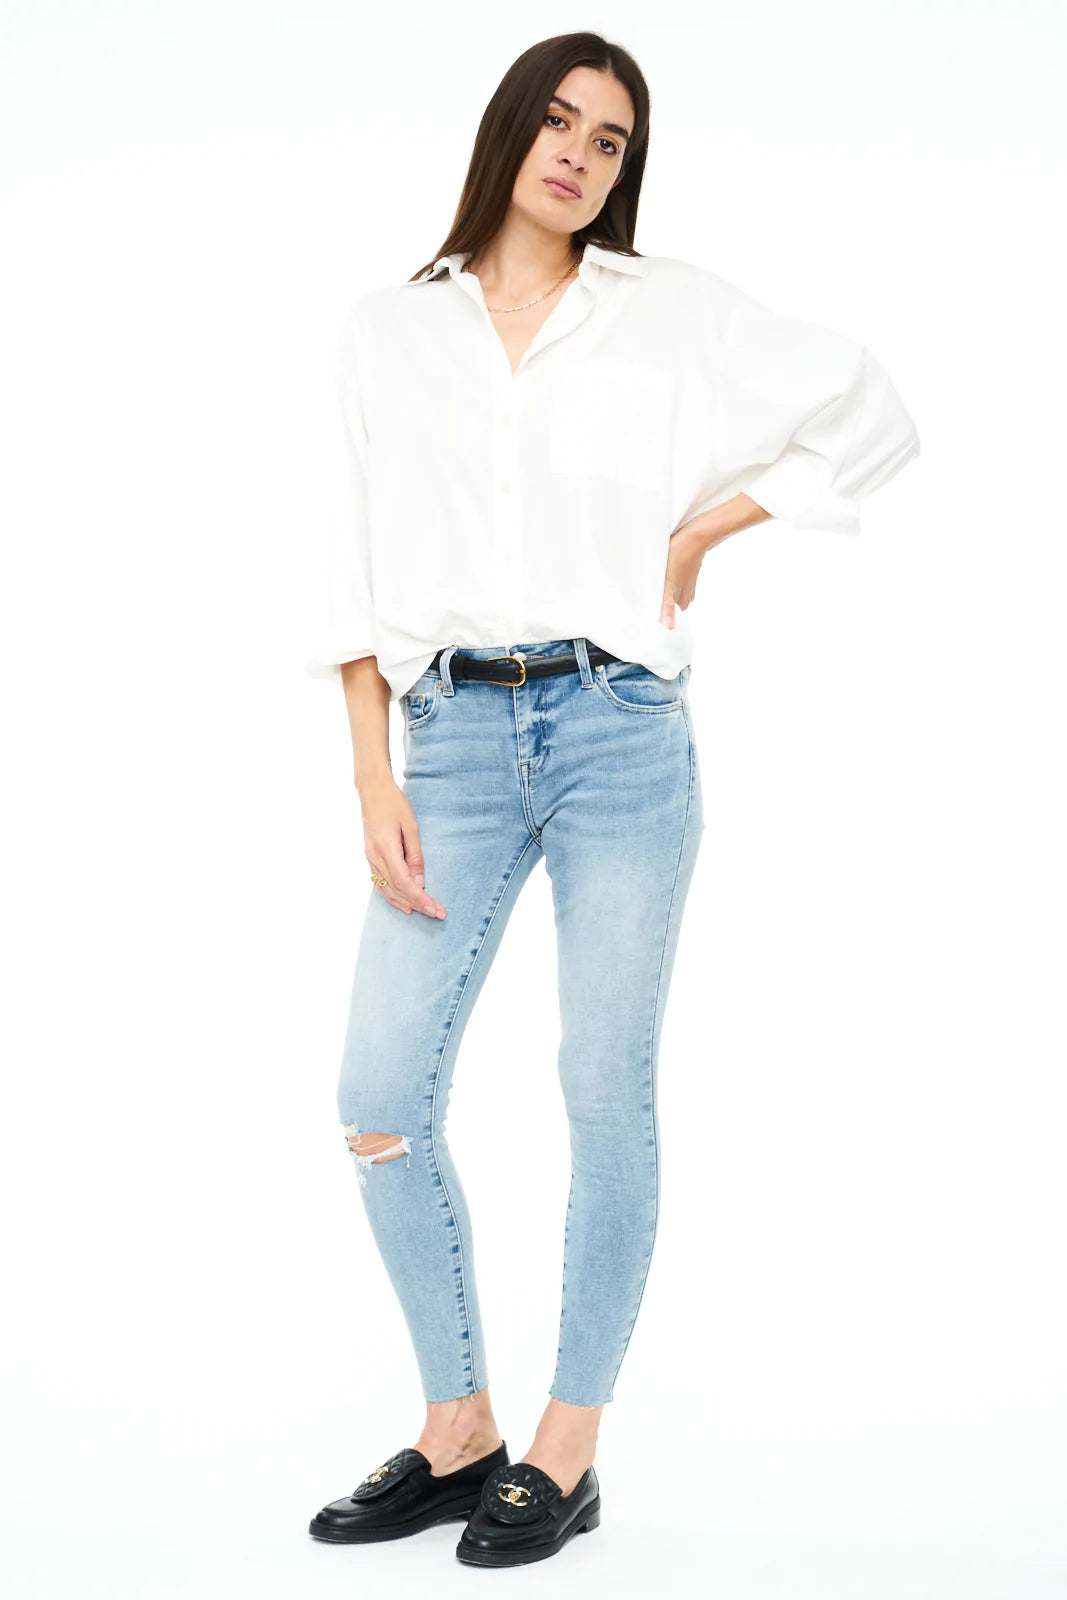 SPANX WHITE FLARE JEANS - Monkee's of Myrtle Beach